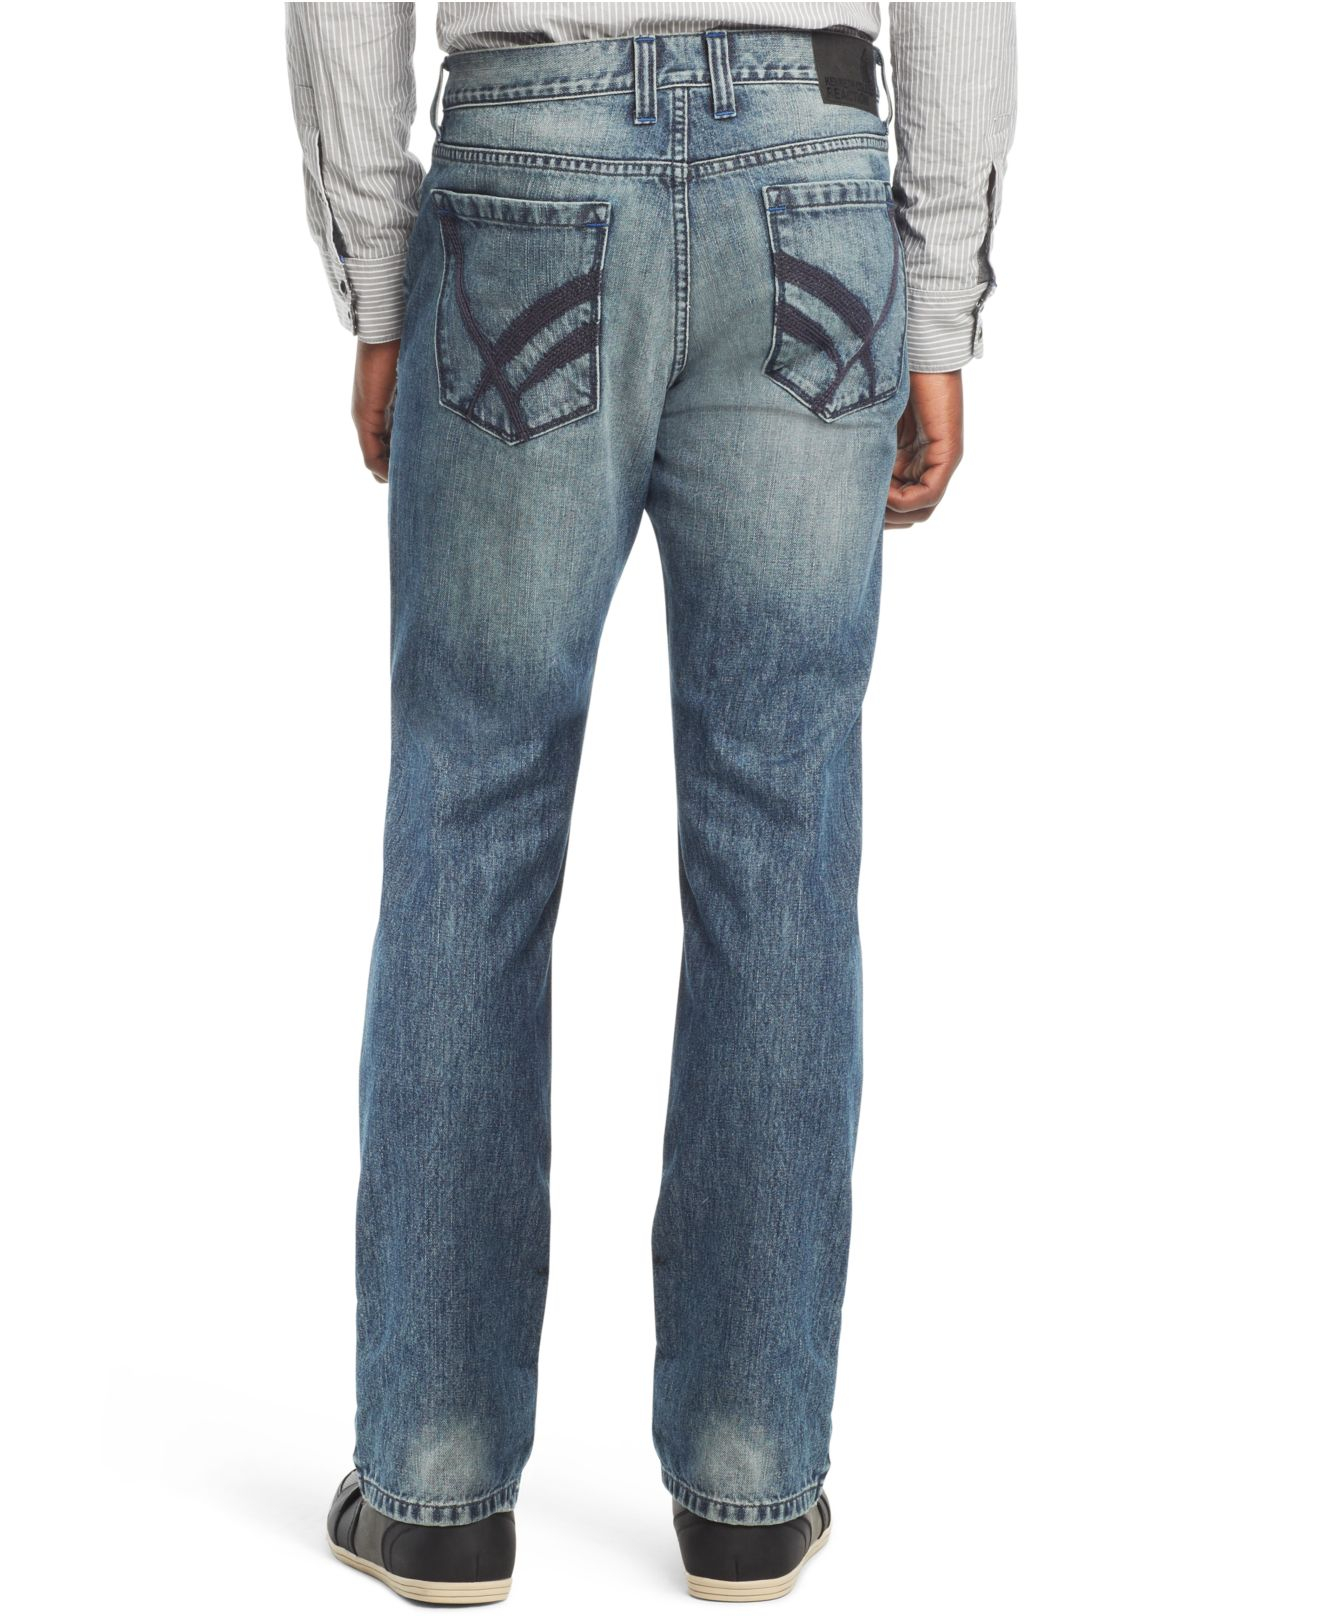 Lyst - Kenneth cole reaction Light Wash Bootcut Jeans in Blue for Men